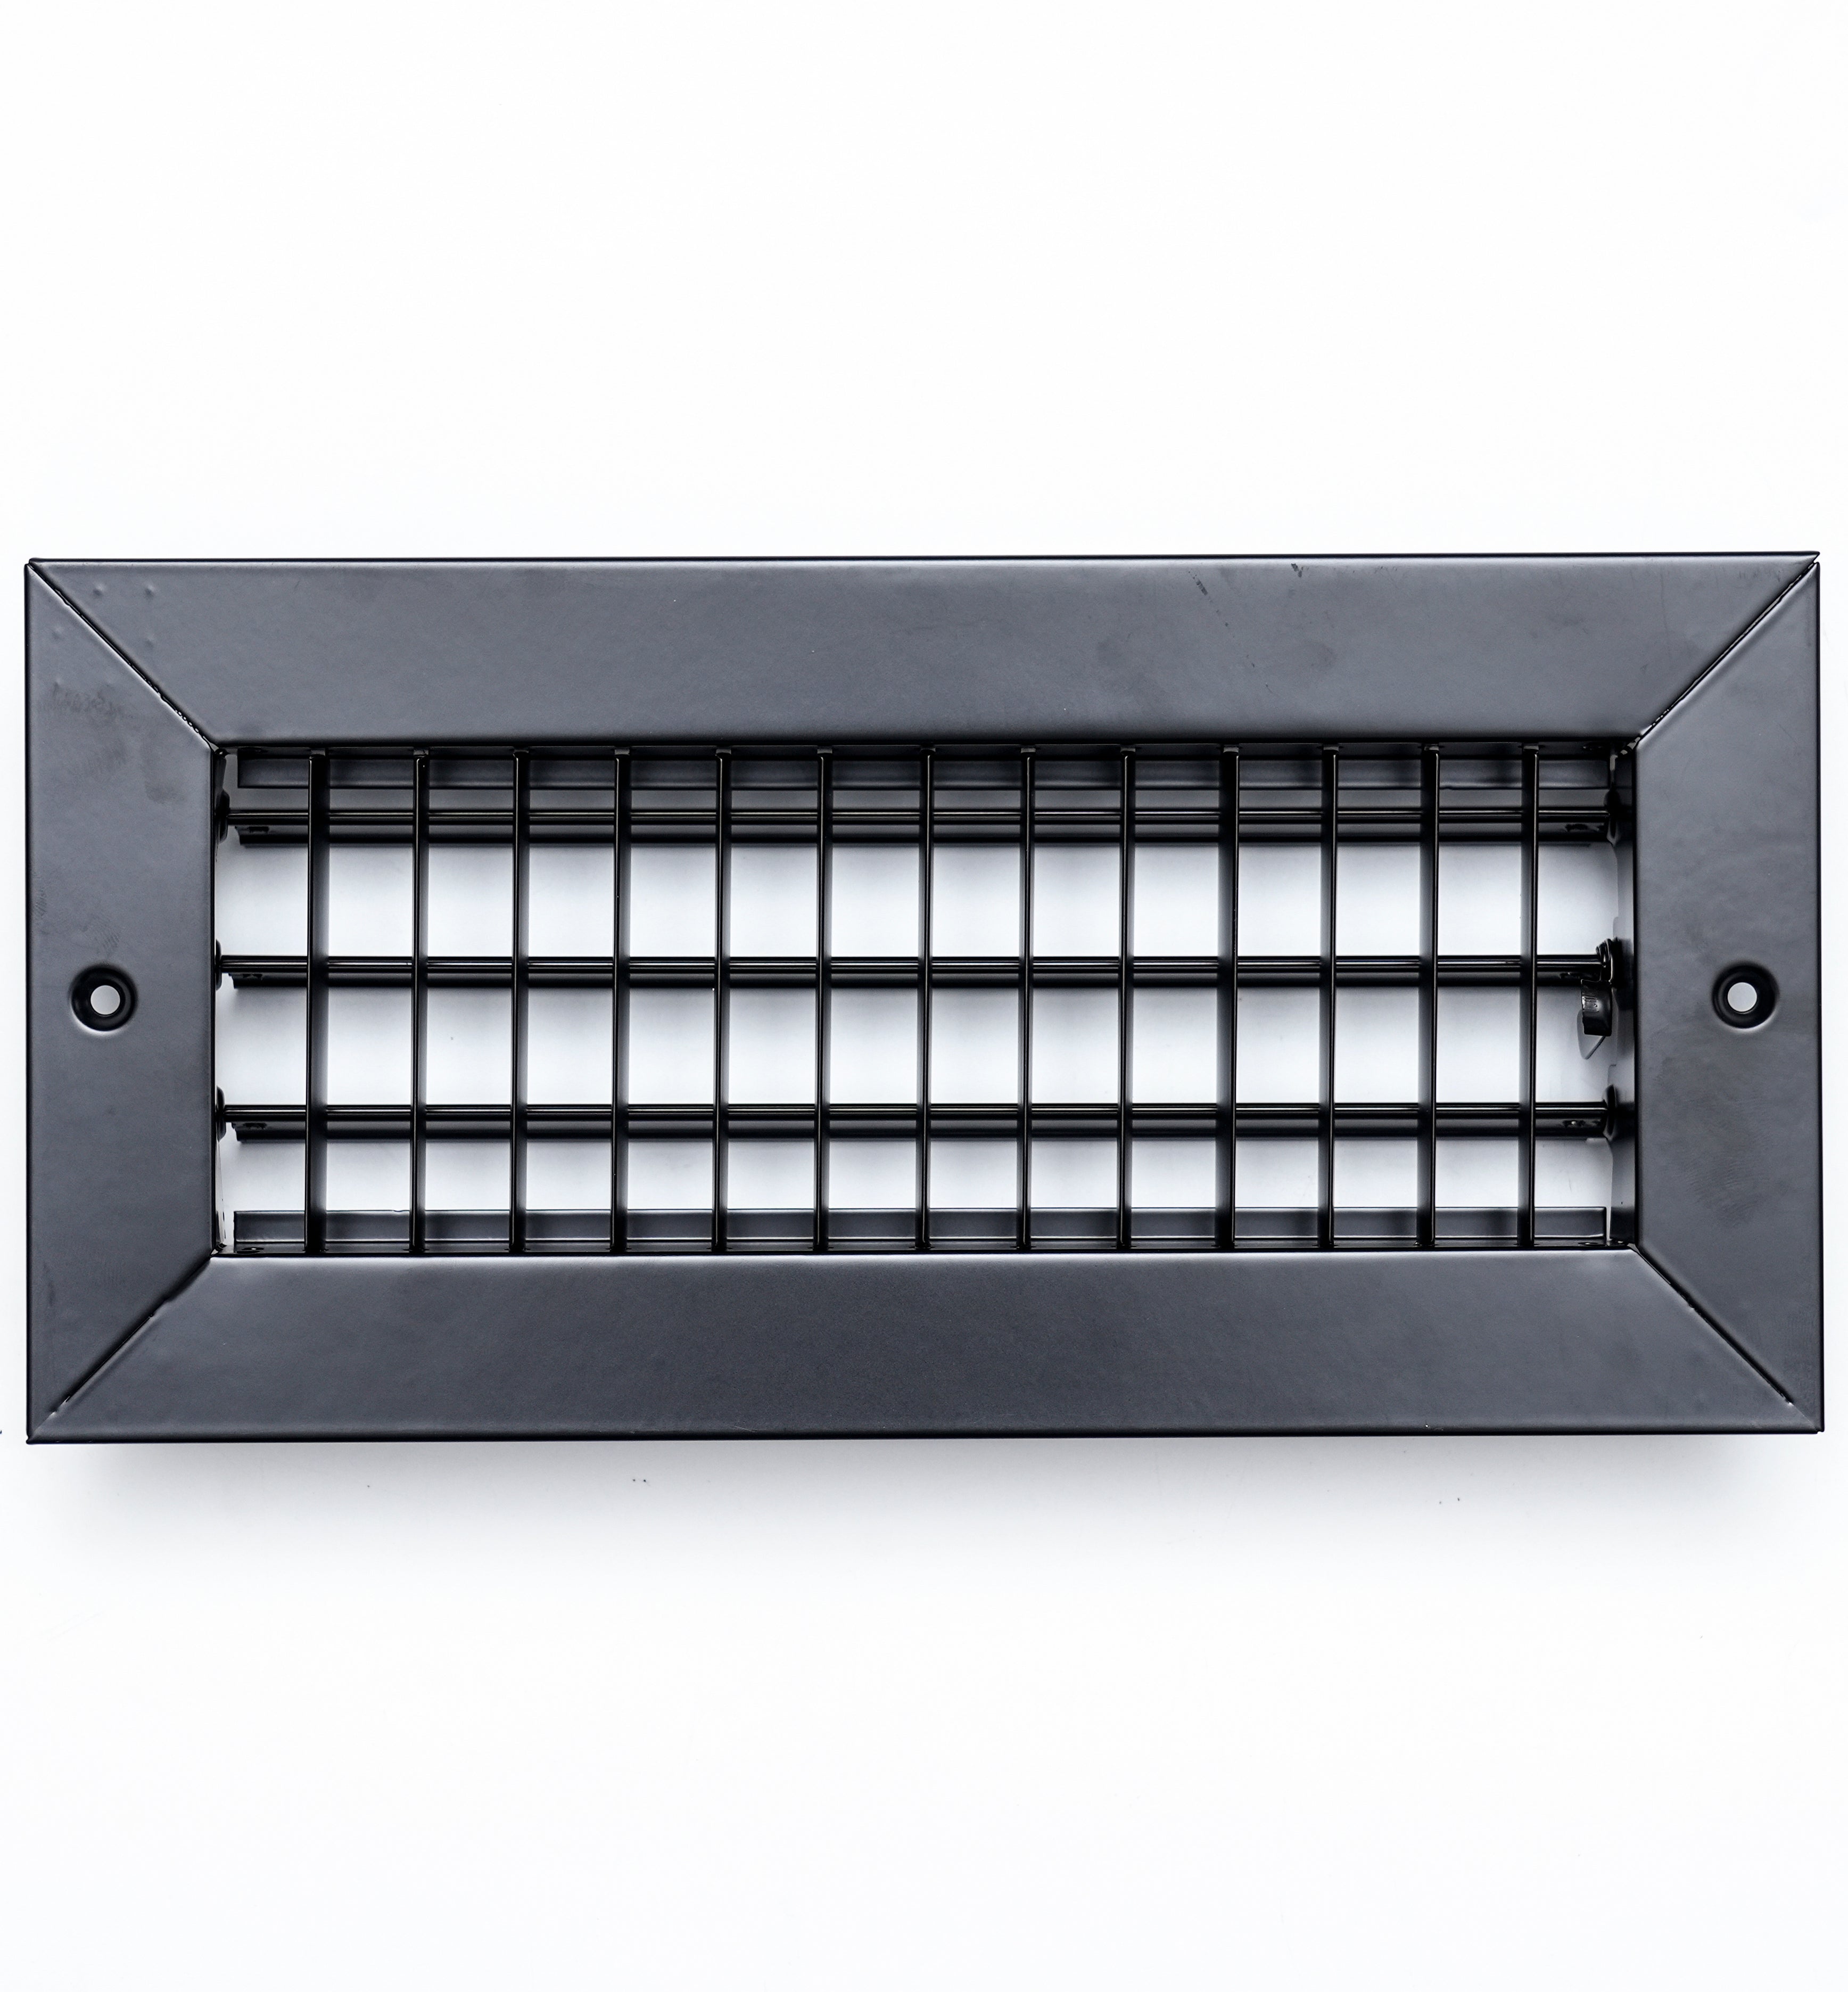 airgrilles 10"w x 4"h steel adjustable air supply grille  -  register vent cover grill for sidewall and ceiling  -  black  -  outer dimensions: 11.75"w x 5.75"h for 10x4 duct opening hnd-adj-bl-10x4  - 1